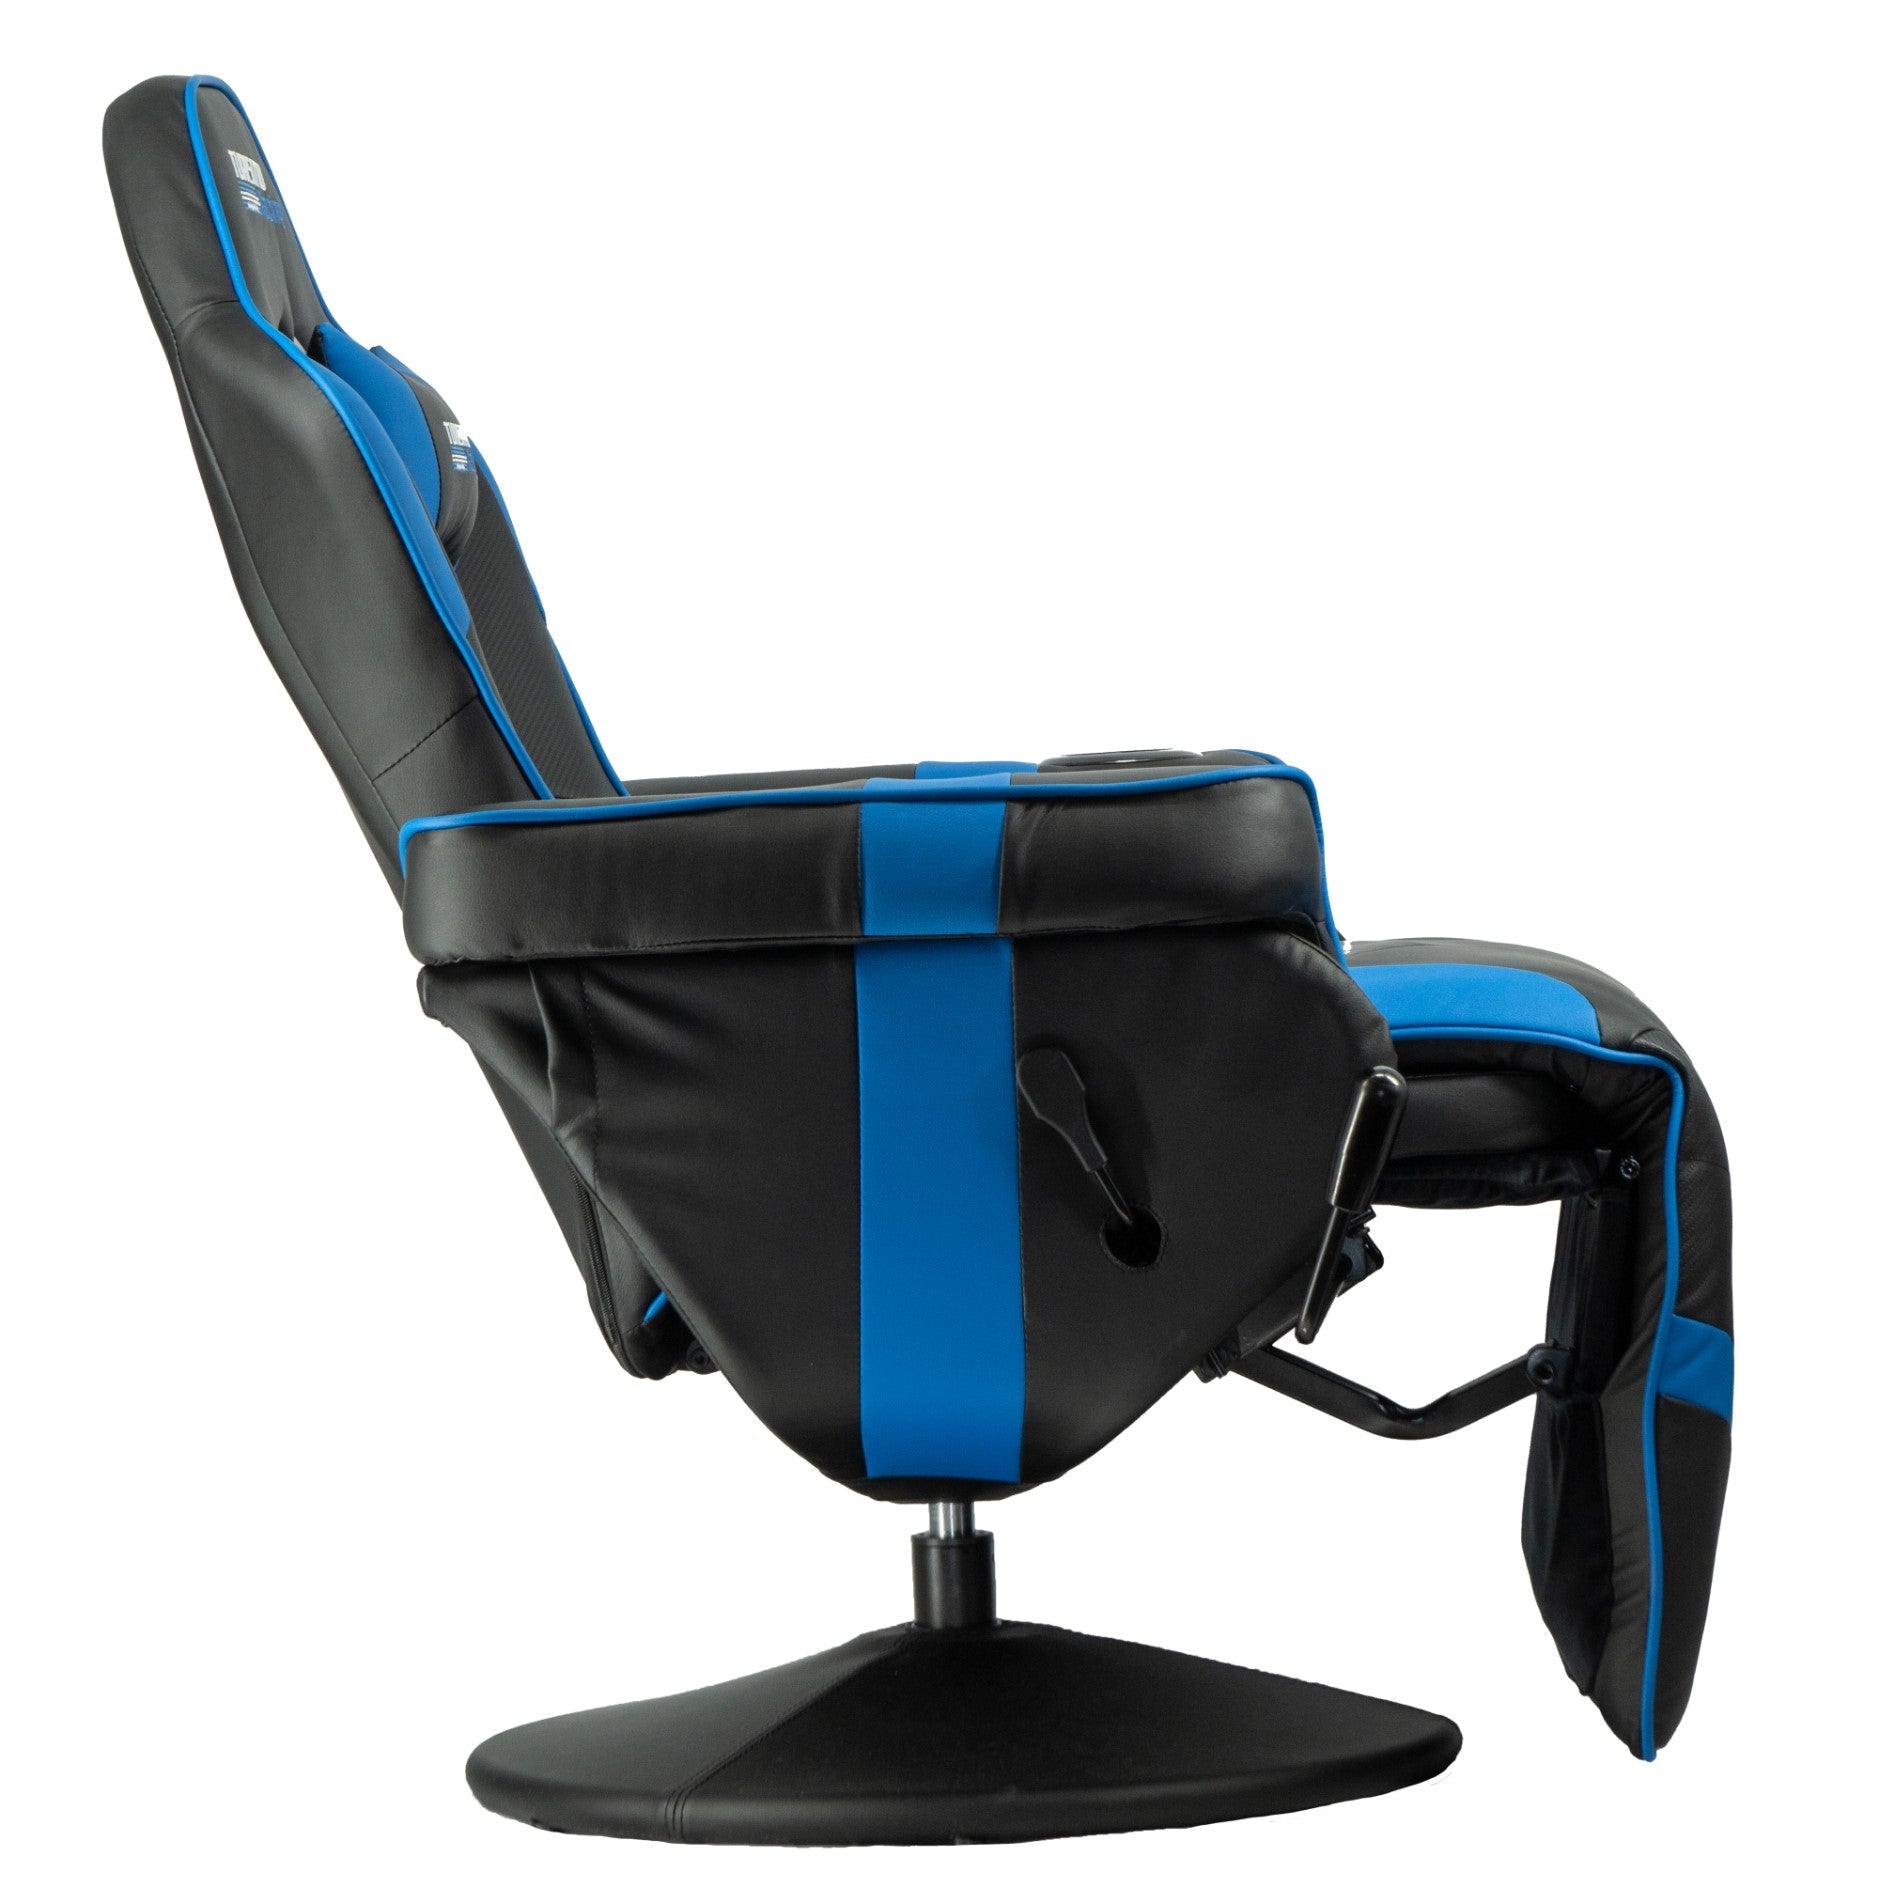 Blue Stanza Gaming Recliner by Turismo Racing